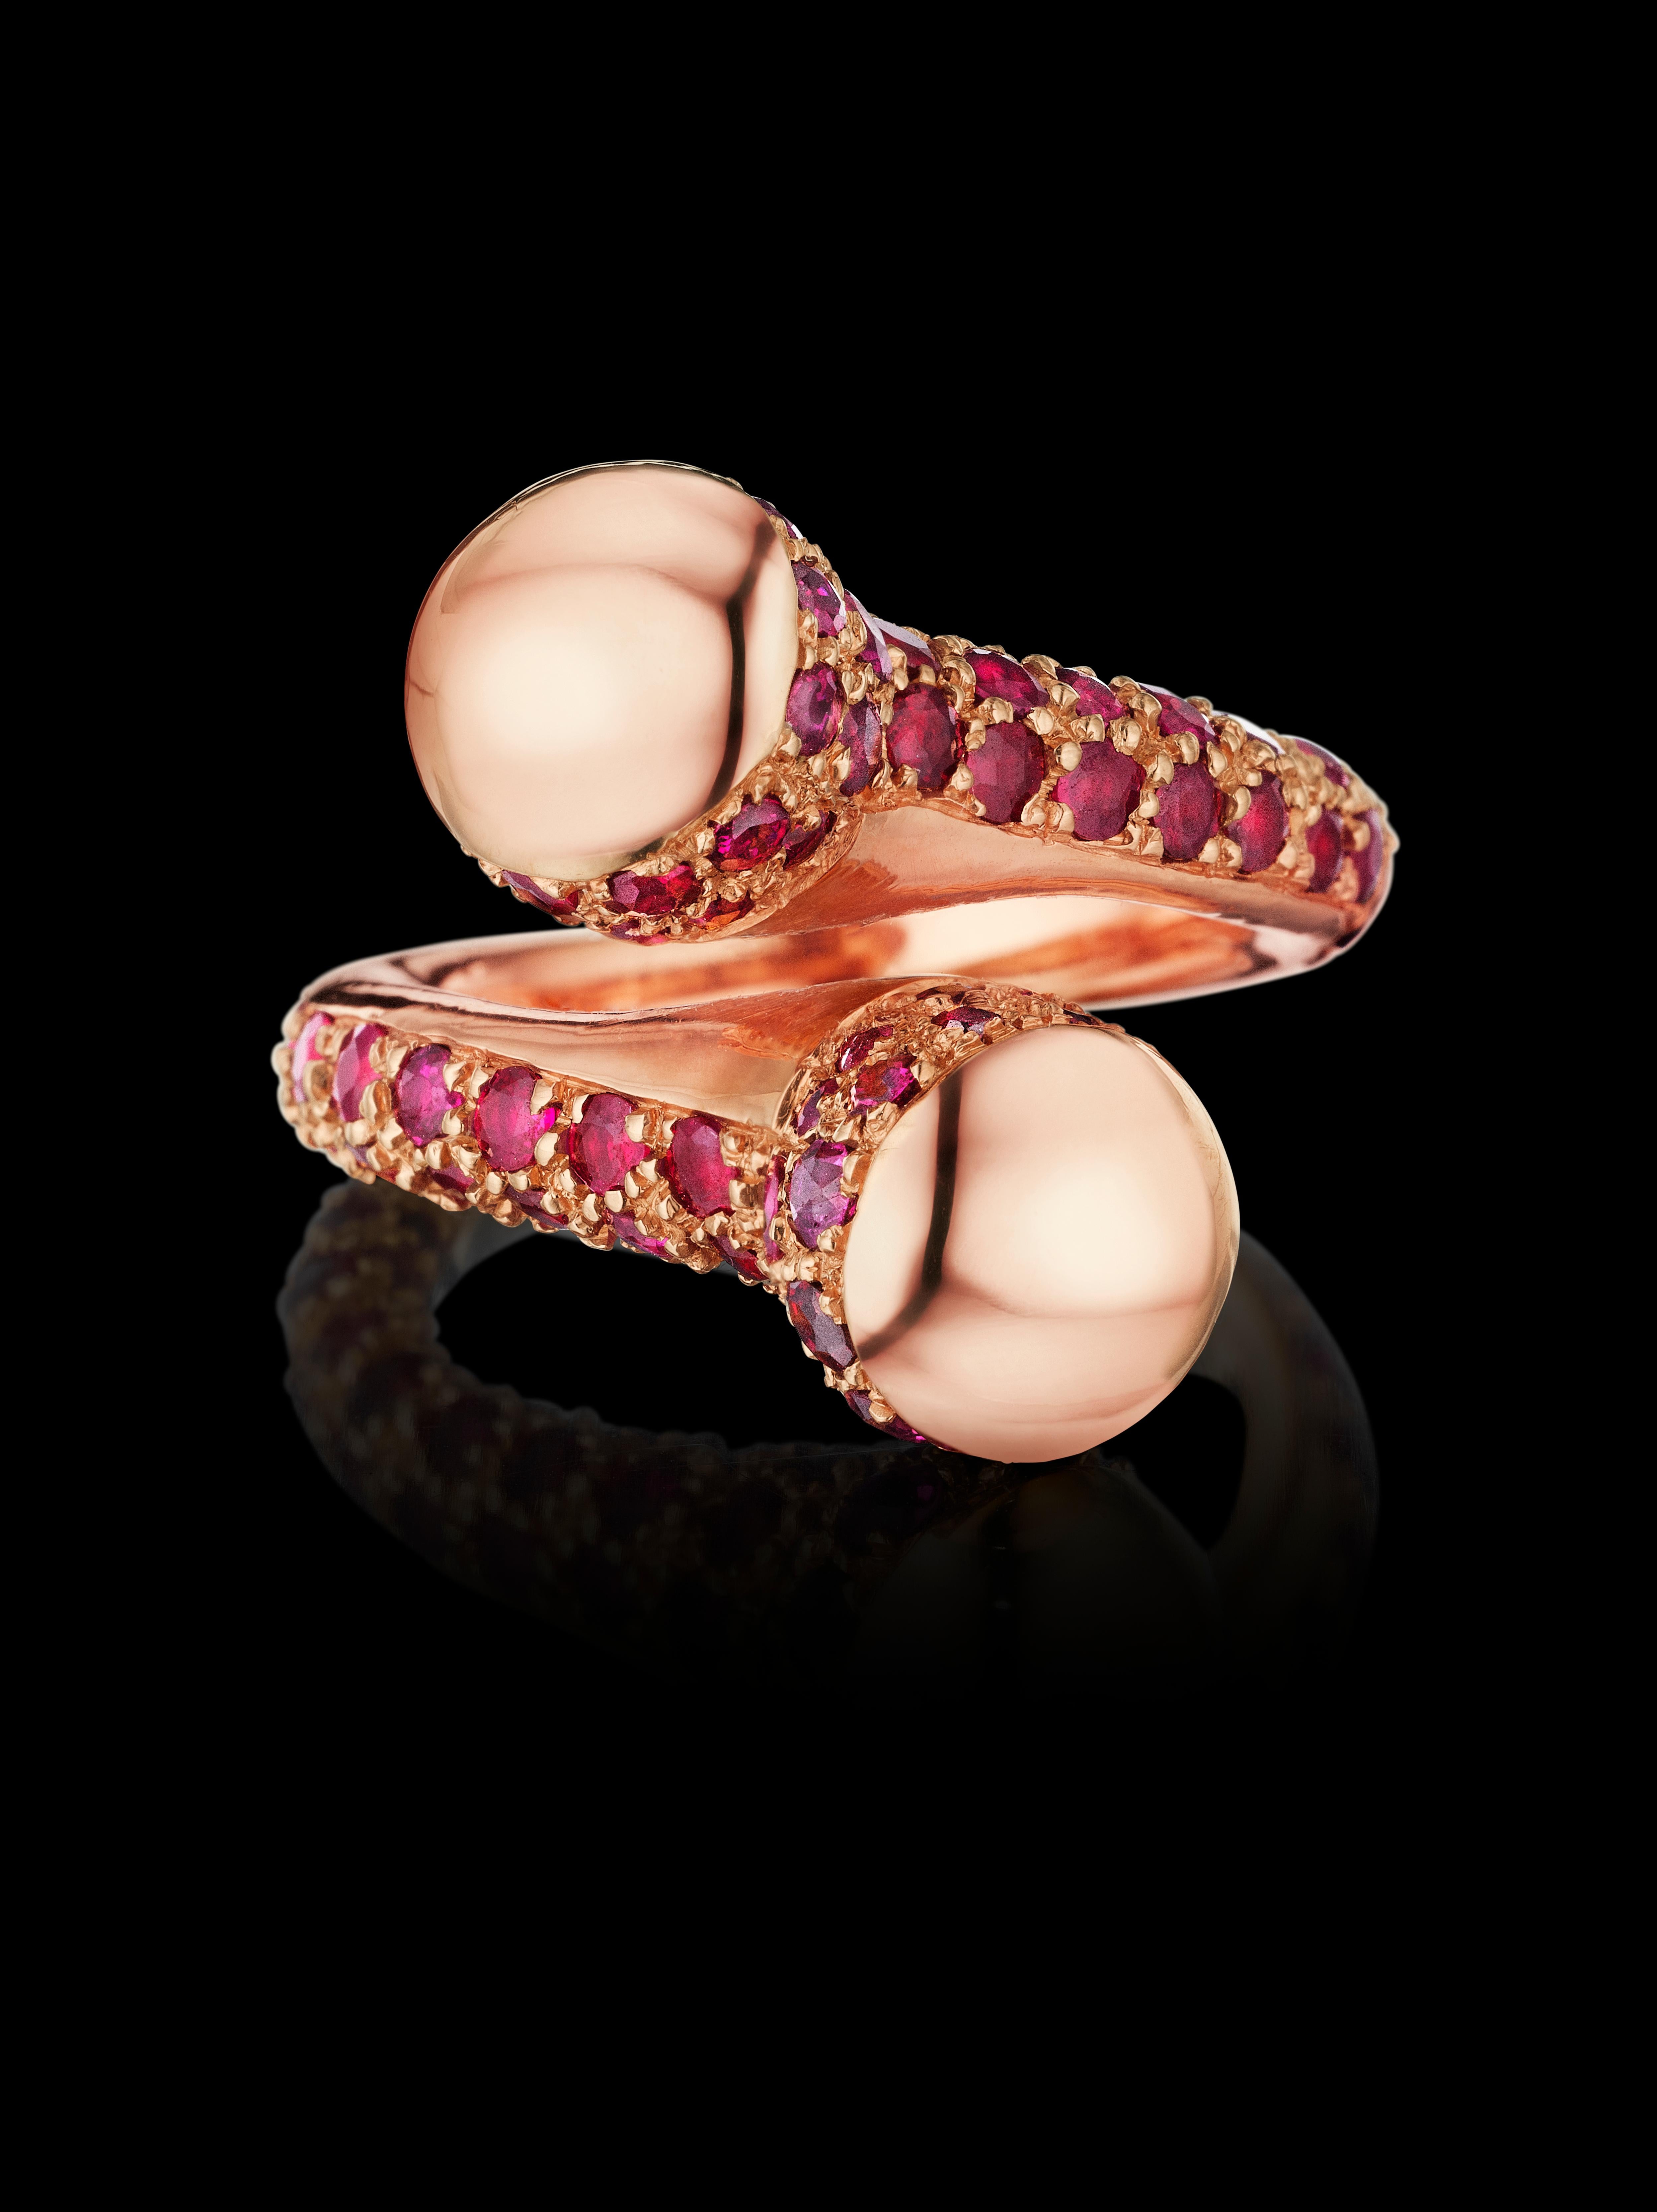 Limited-Edition Ring features Red Purplish Rubies - a cross over ring that is bold, daring and feminine, covered with sparkling pave set melee rubies, ring is set in 18k Rose gold. 

Size 7.25 

Gemstones:  100 Red purplish natural round-cut Rubies,